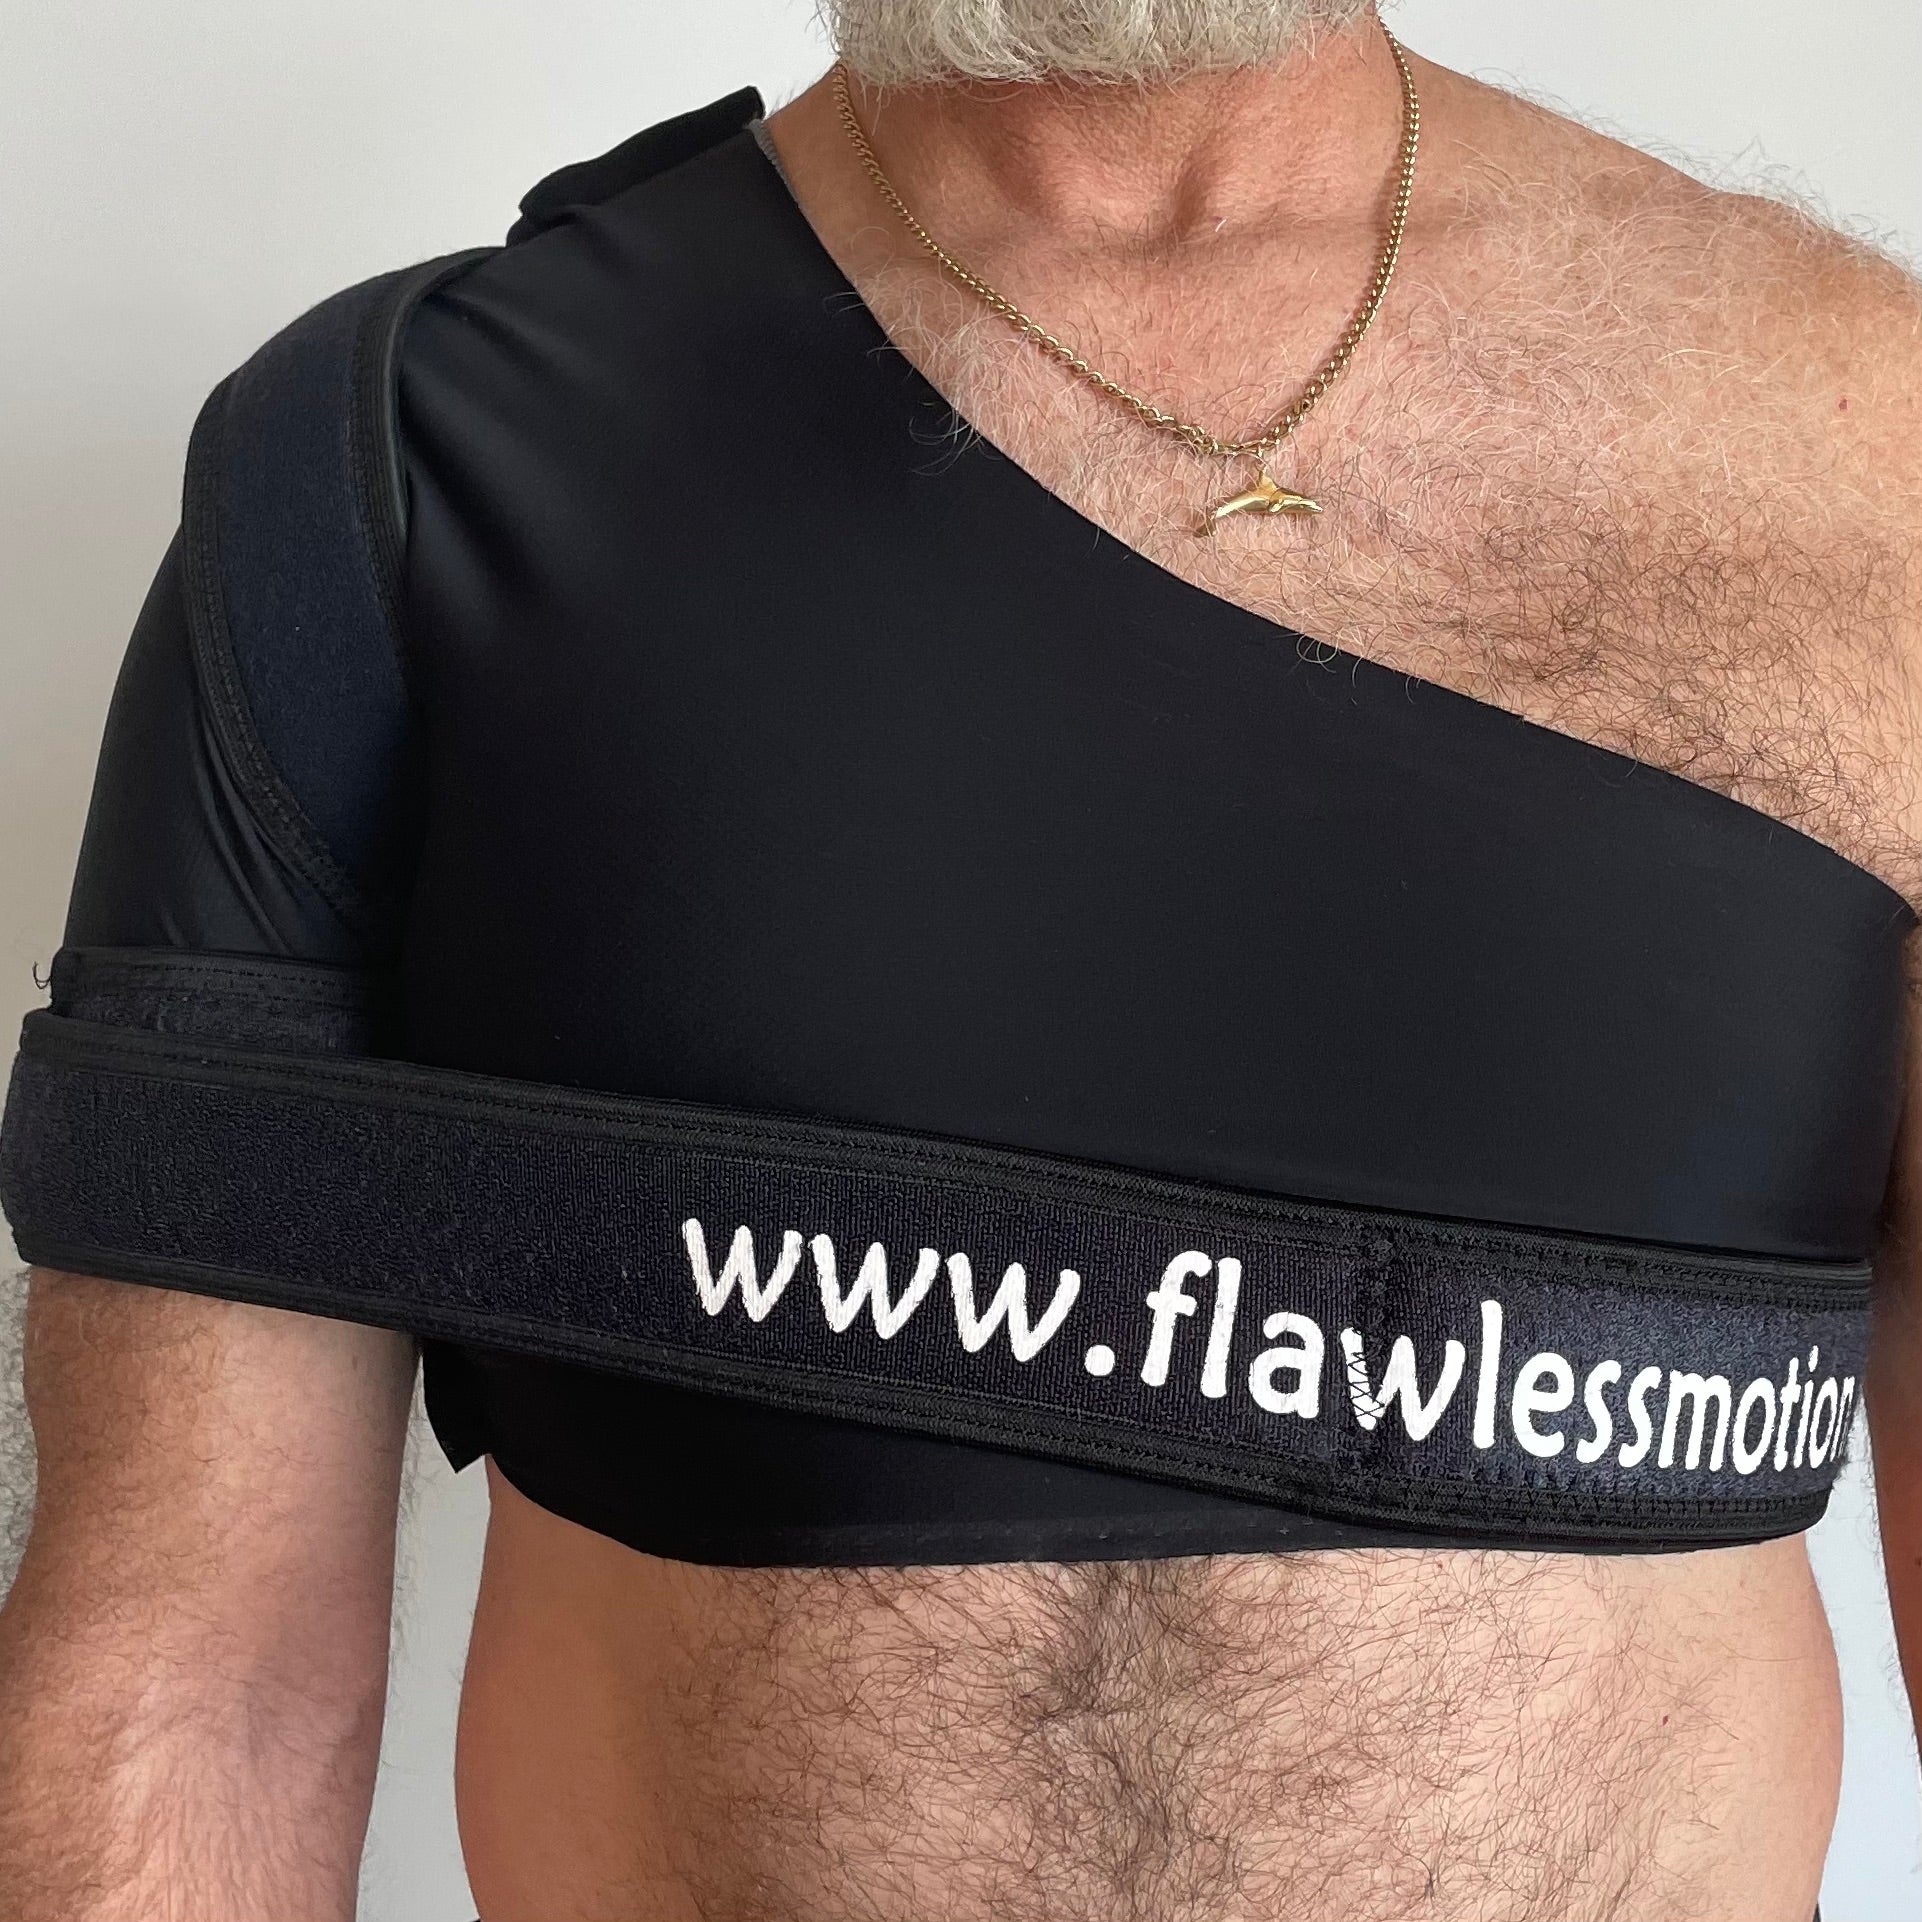 Discover Shoulder Support Brace by Flawless Motion New Zealand